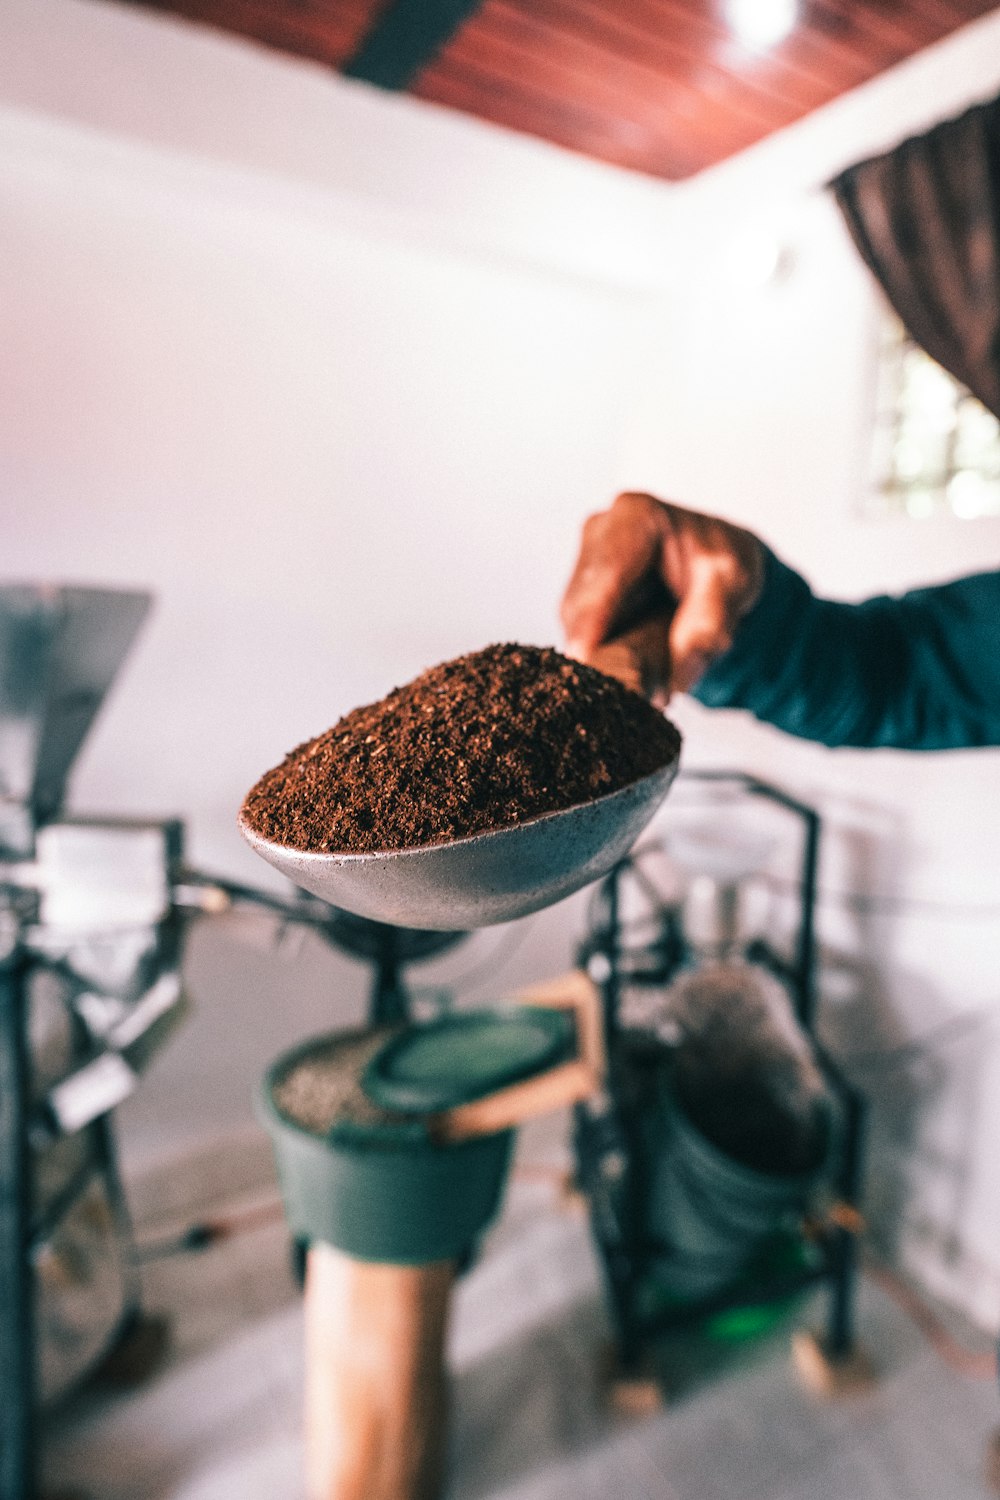 a person holding a bowl of coffee beans